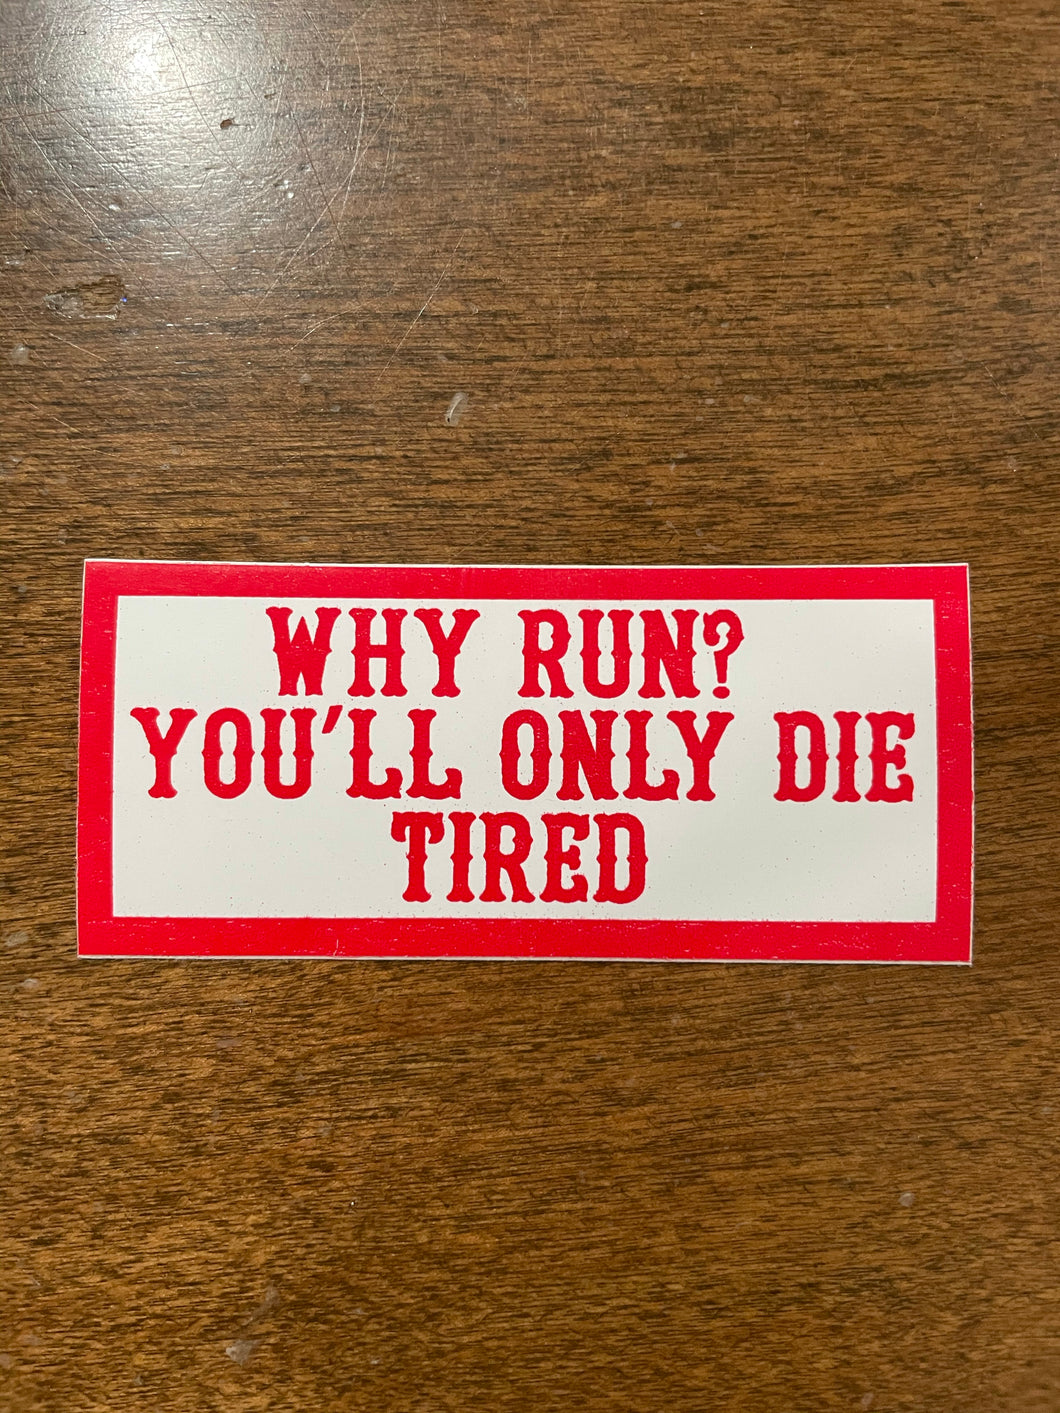 WHY RUN? YOU’LL ONLY DIE TIRED